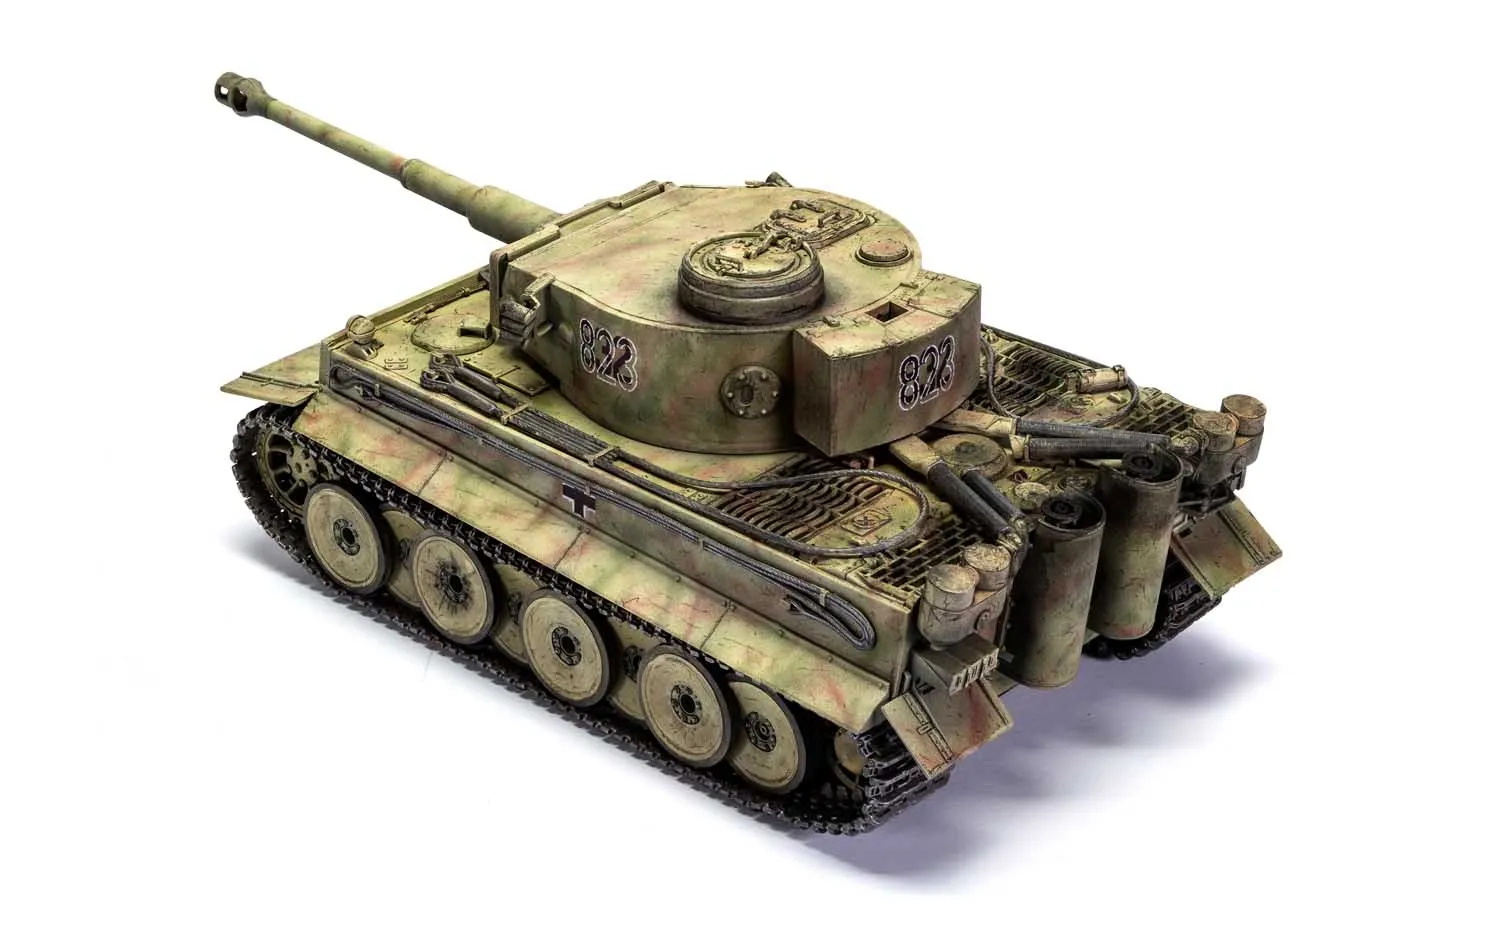 Tiger-1 "Early Version"